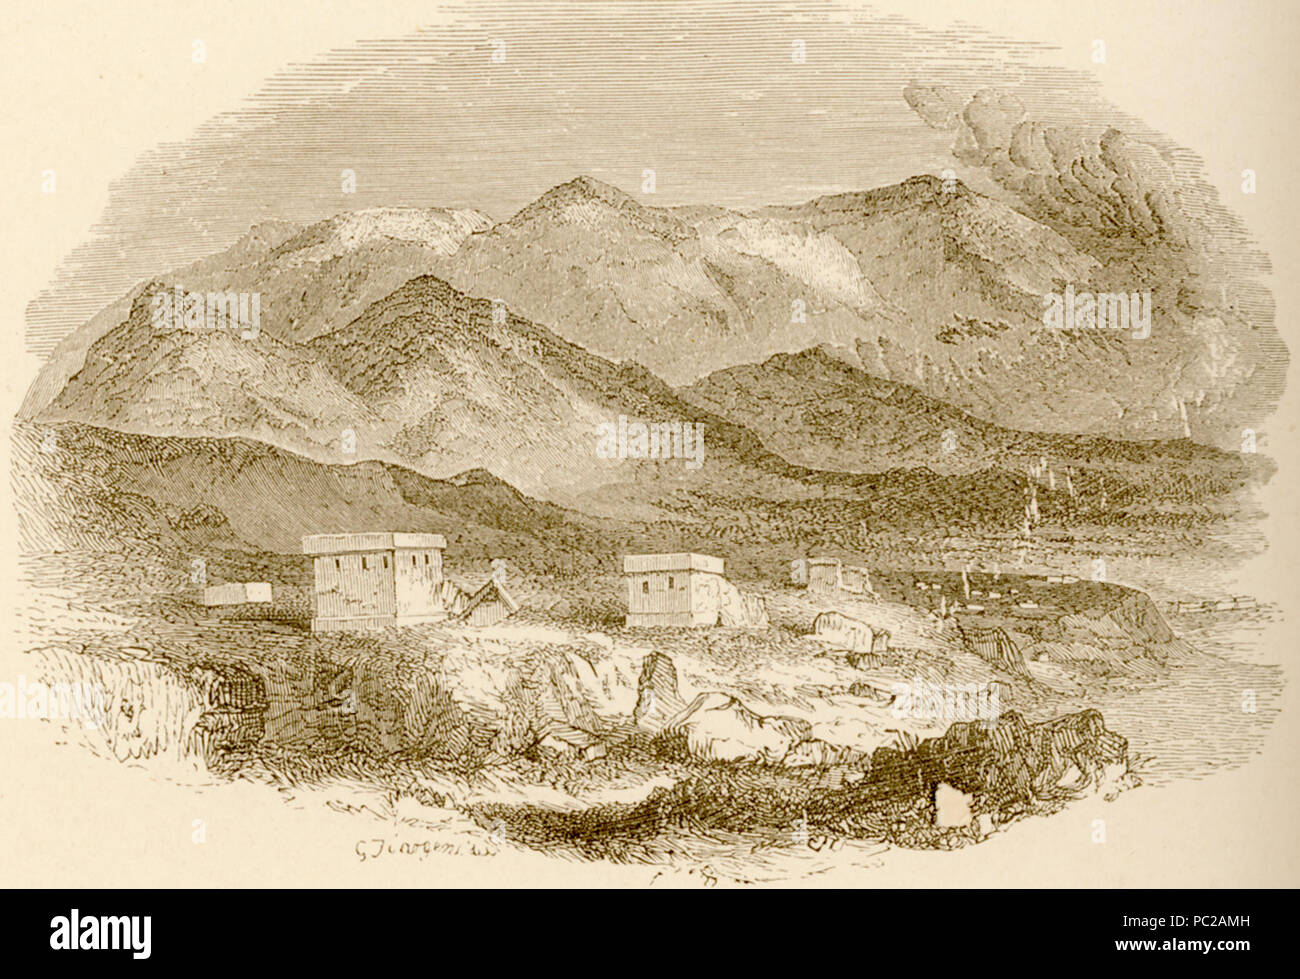 426 Mount Cithaeron and Tombs at Platea - Wordsworth Christopher - 1882 Stock Photo